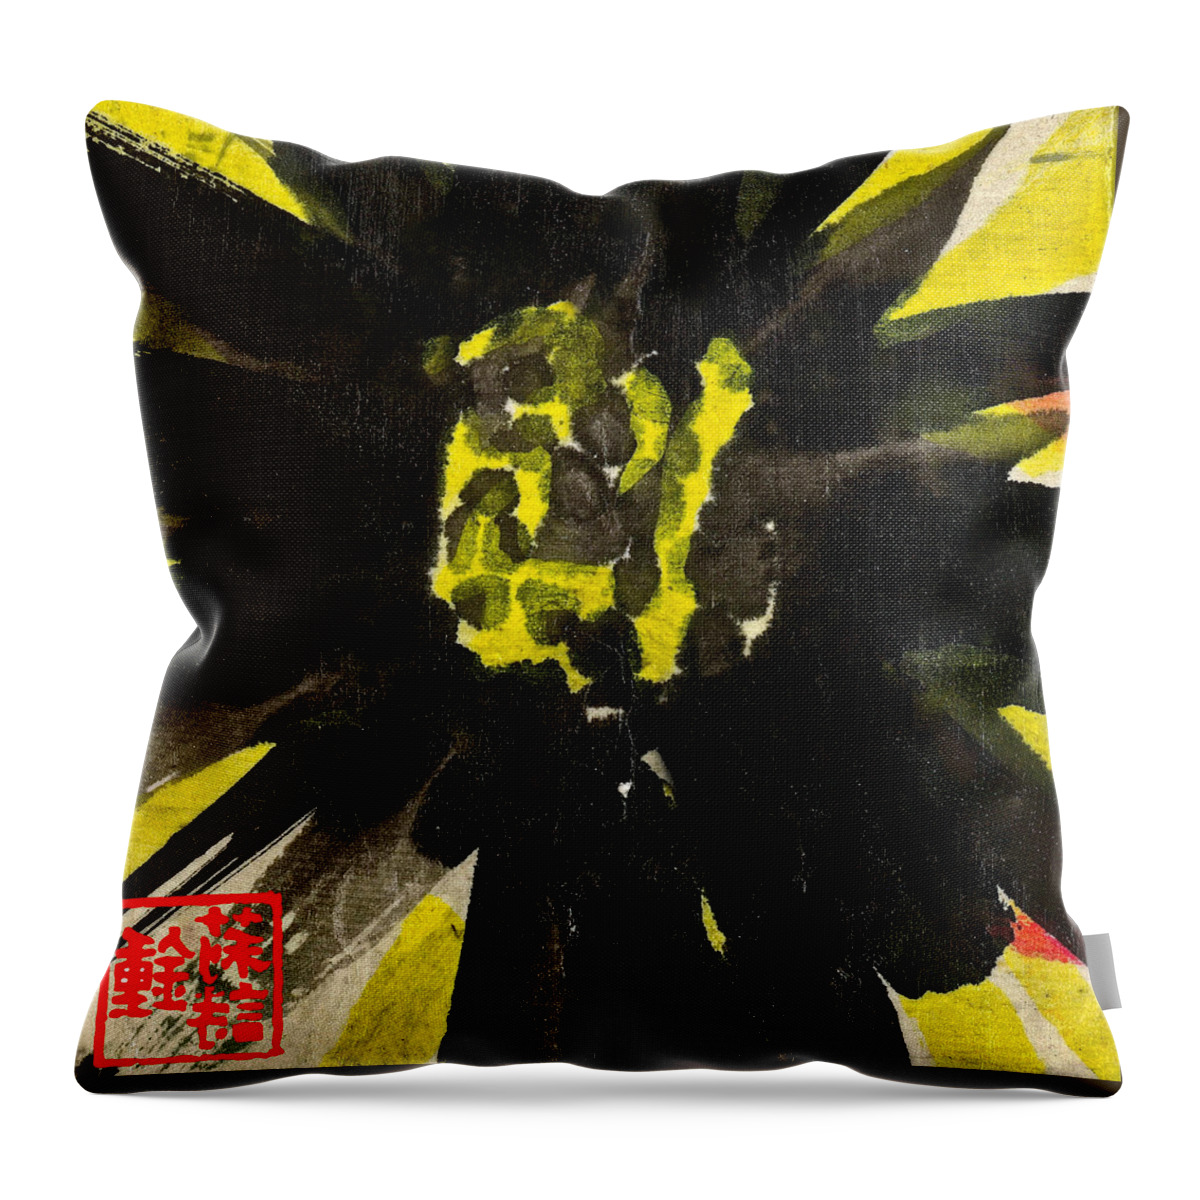 Watercolor Throw Pillow featuring the painting Asian Sunflower by Joan Reese